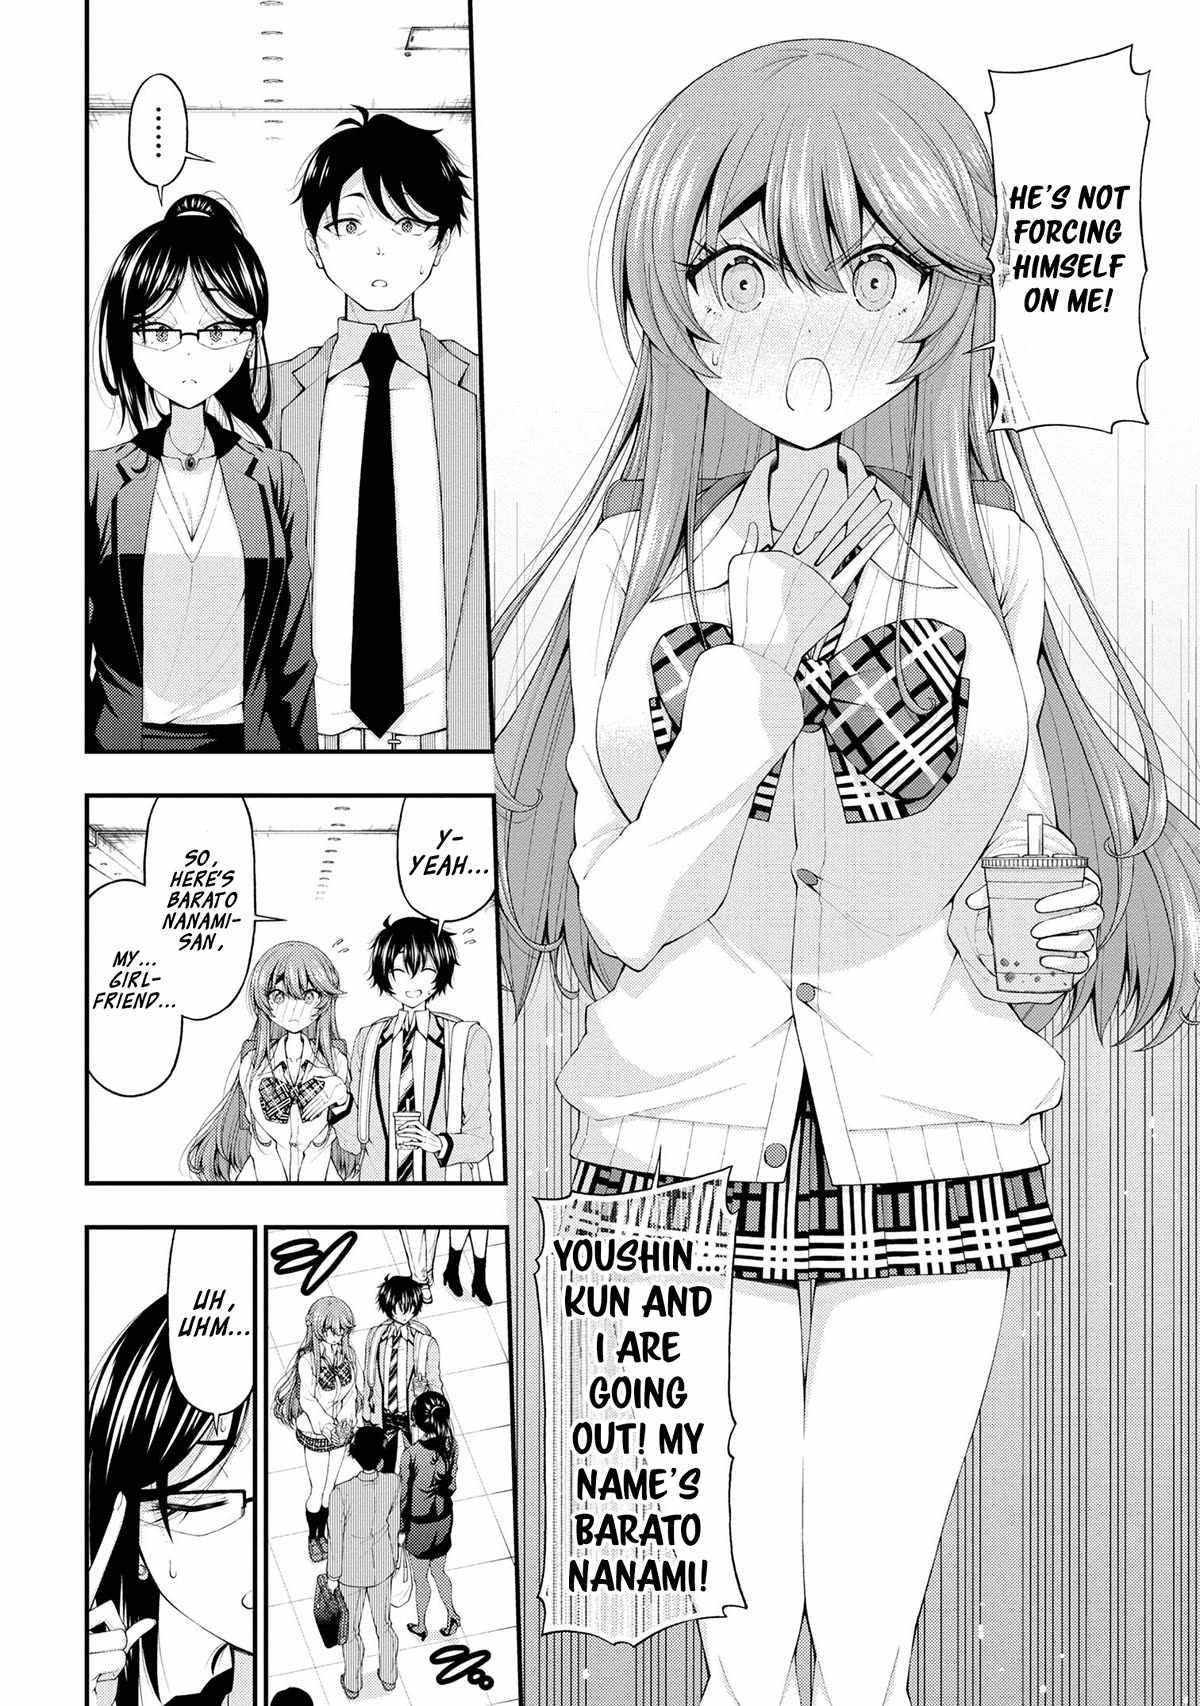 The Gal Who Was Meant to Confess to Me as a Game Punishment Has Apparently Fallen in Love with Me Chapter 14-eng-li - Page 15